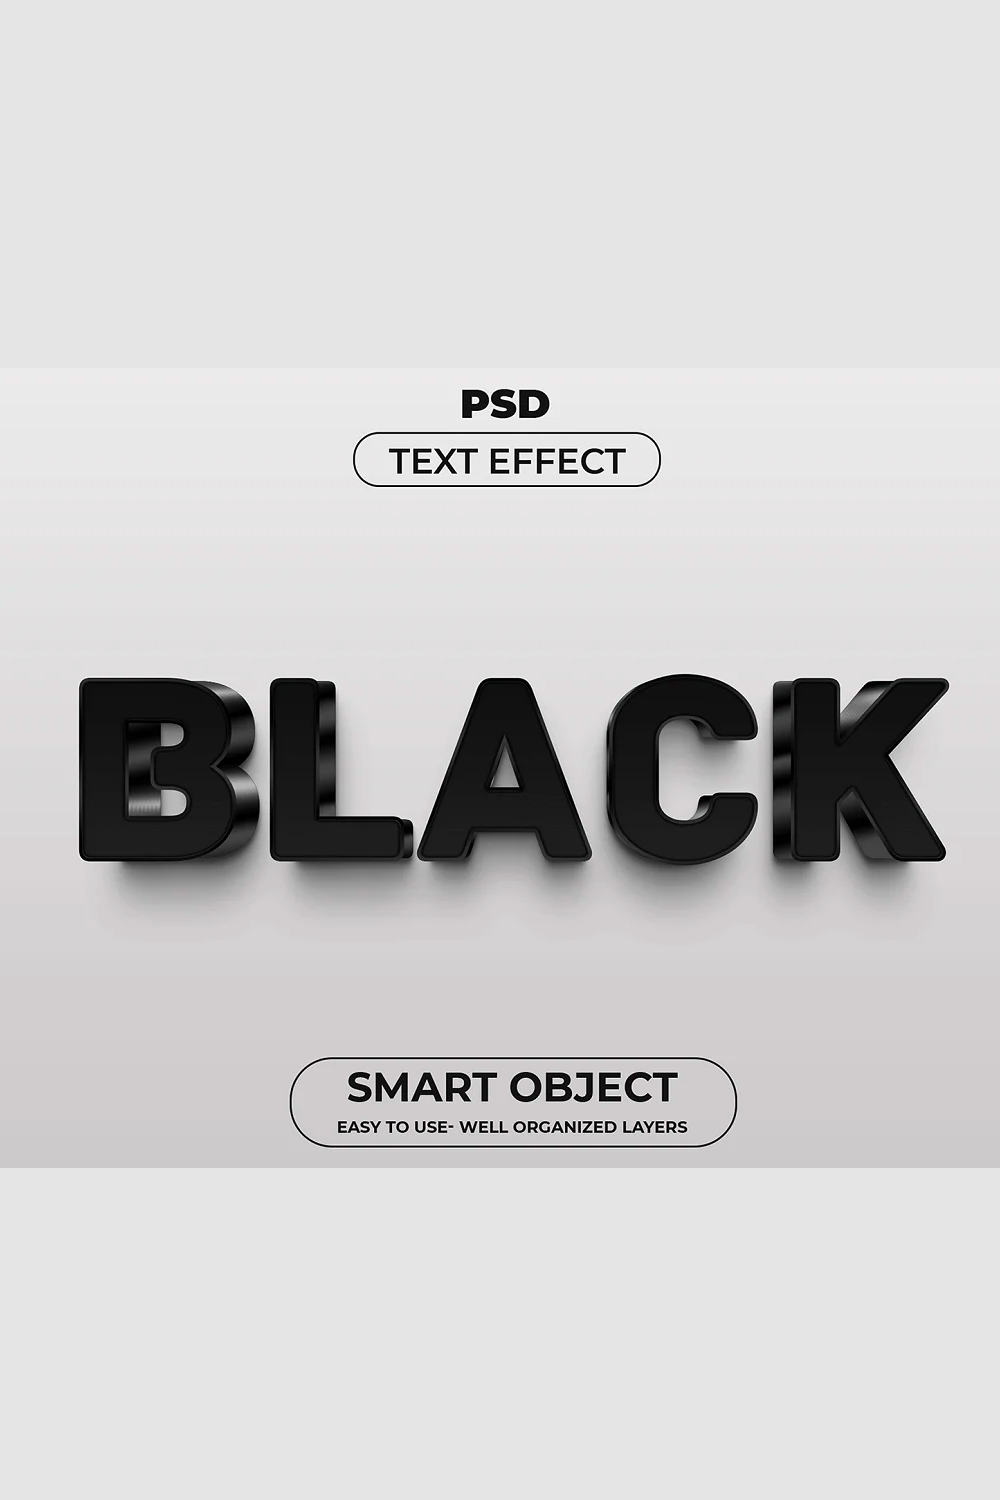 A black text effect with a white background.